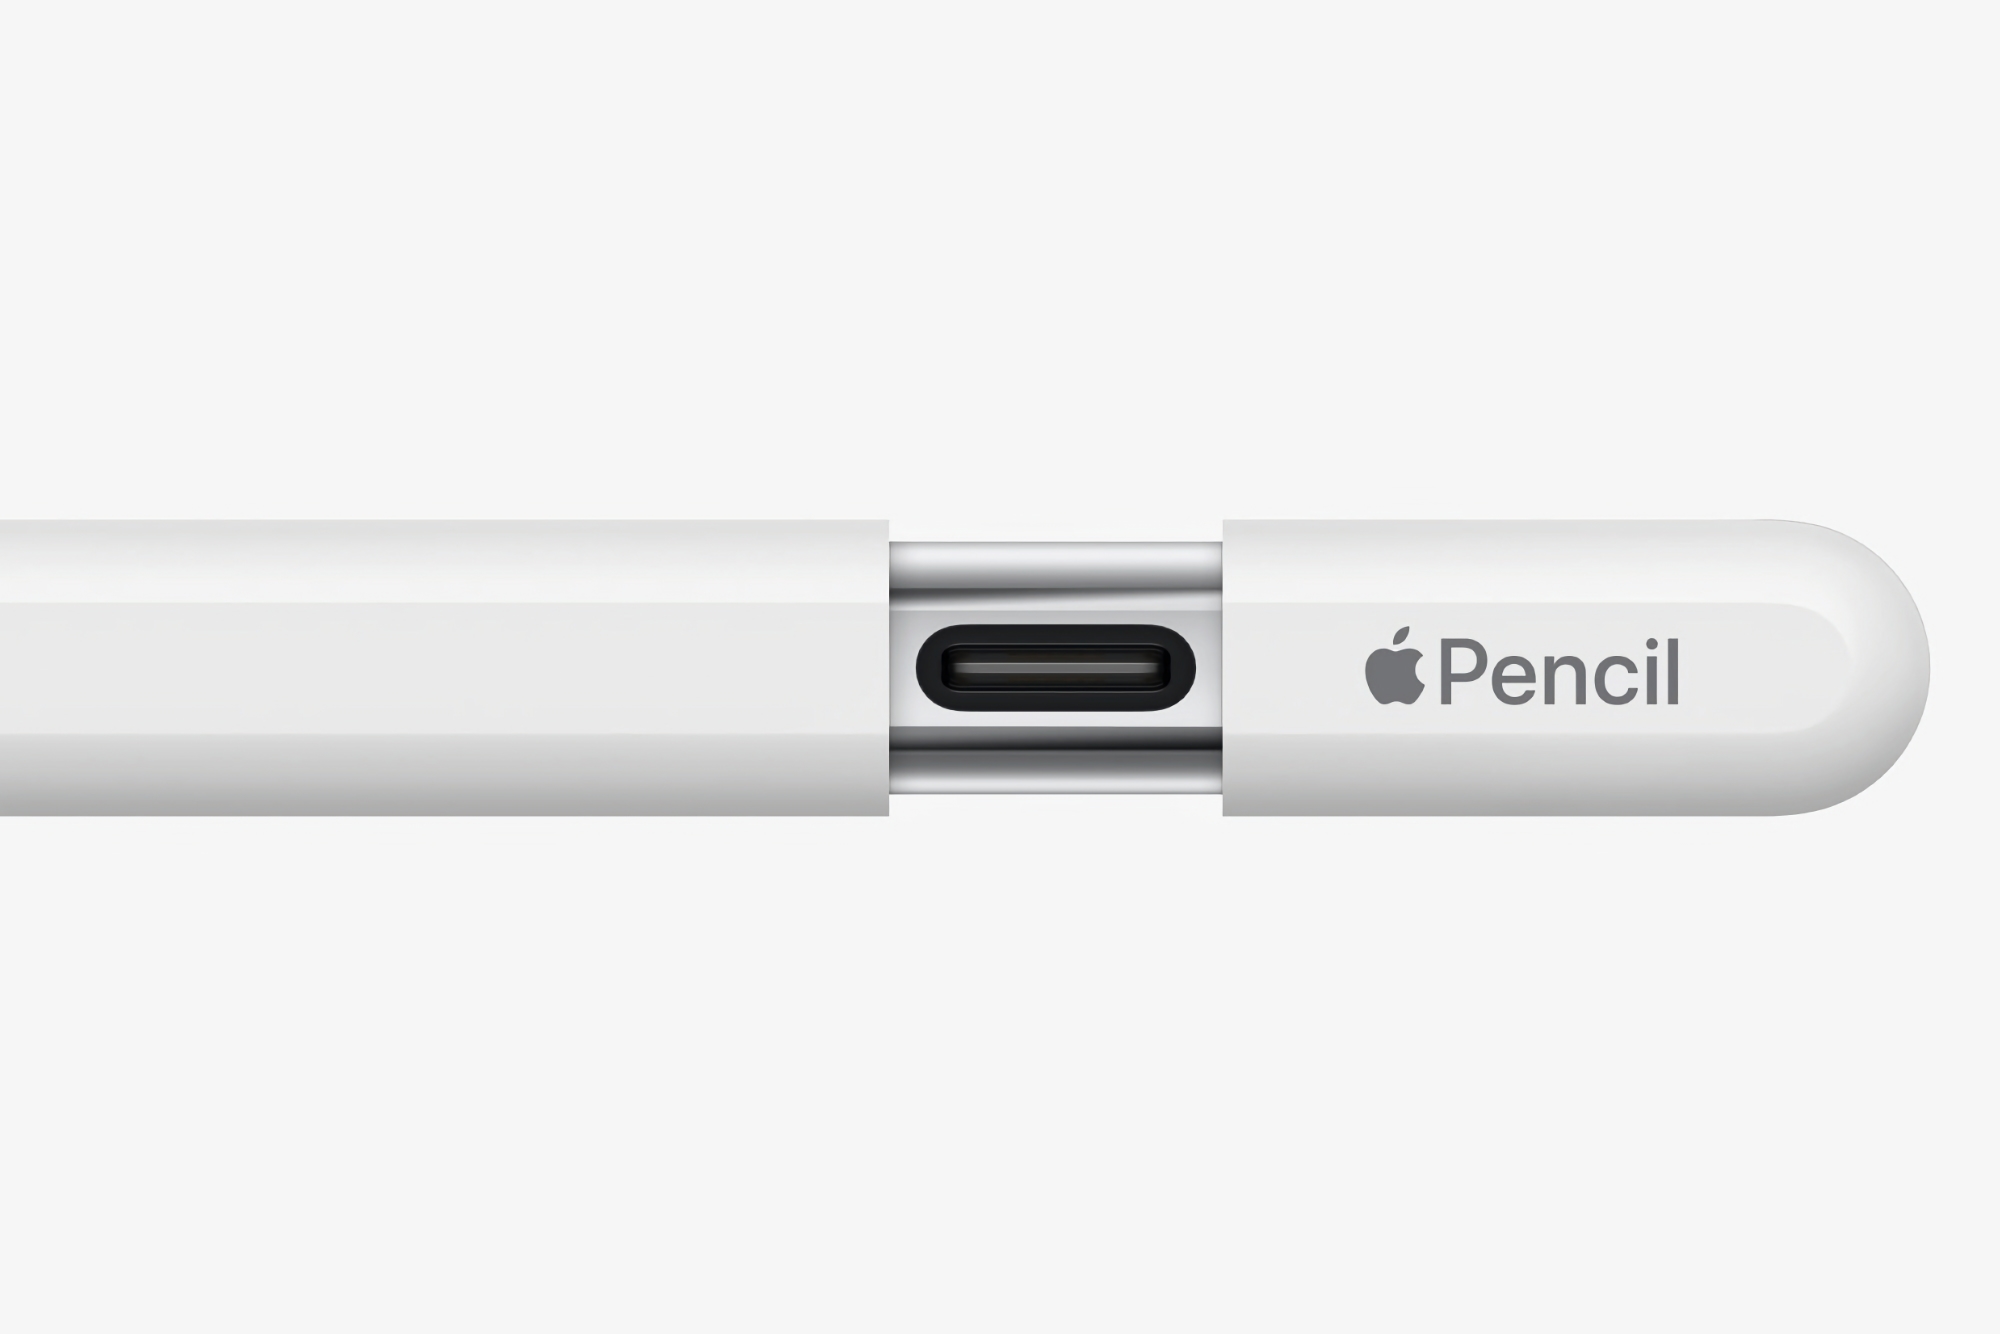 Apple has released new firmware for Apple Pencil with USB-C